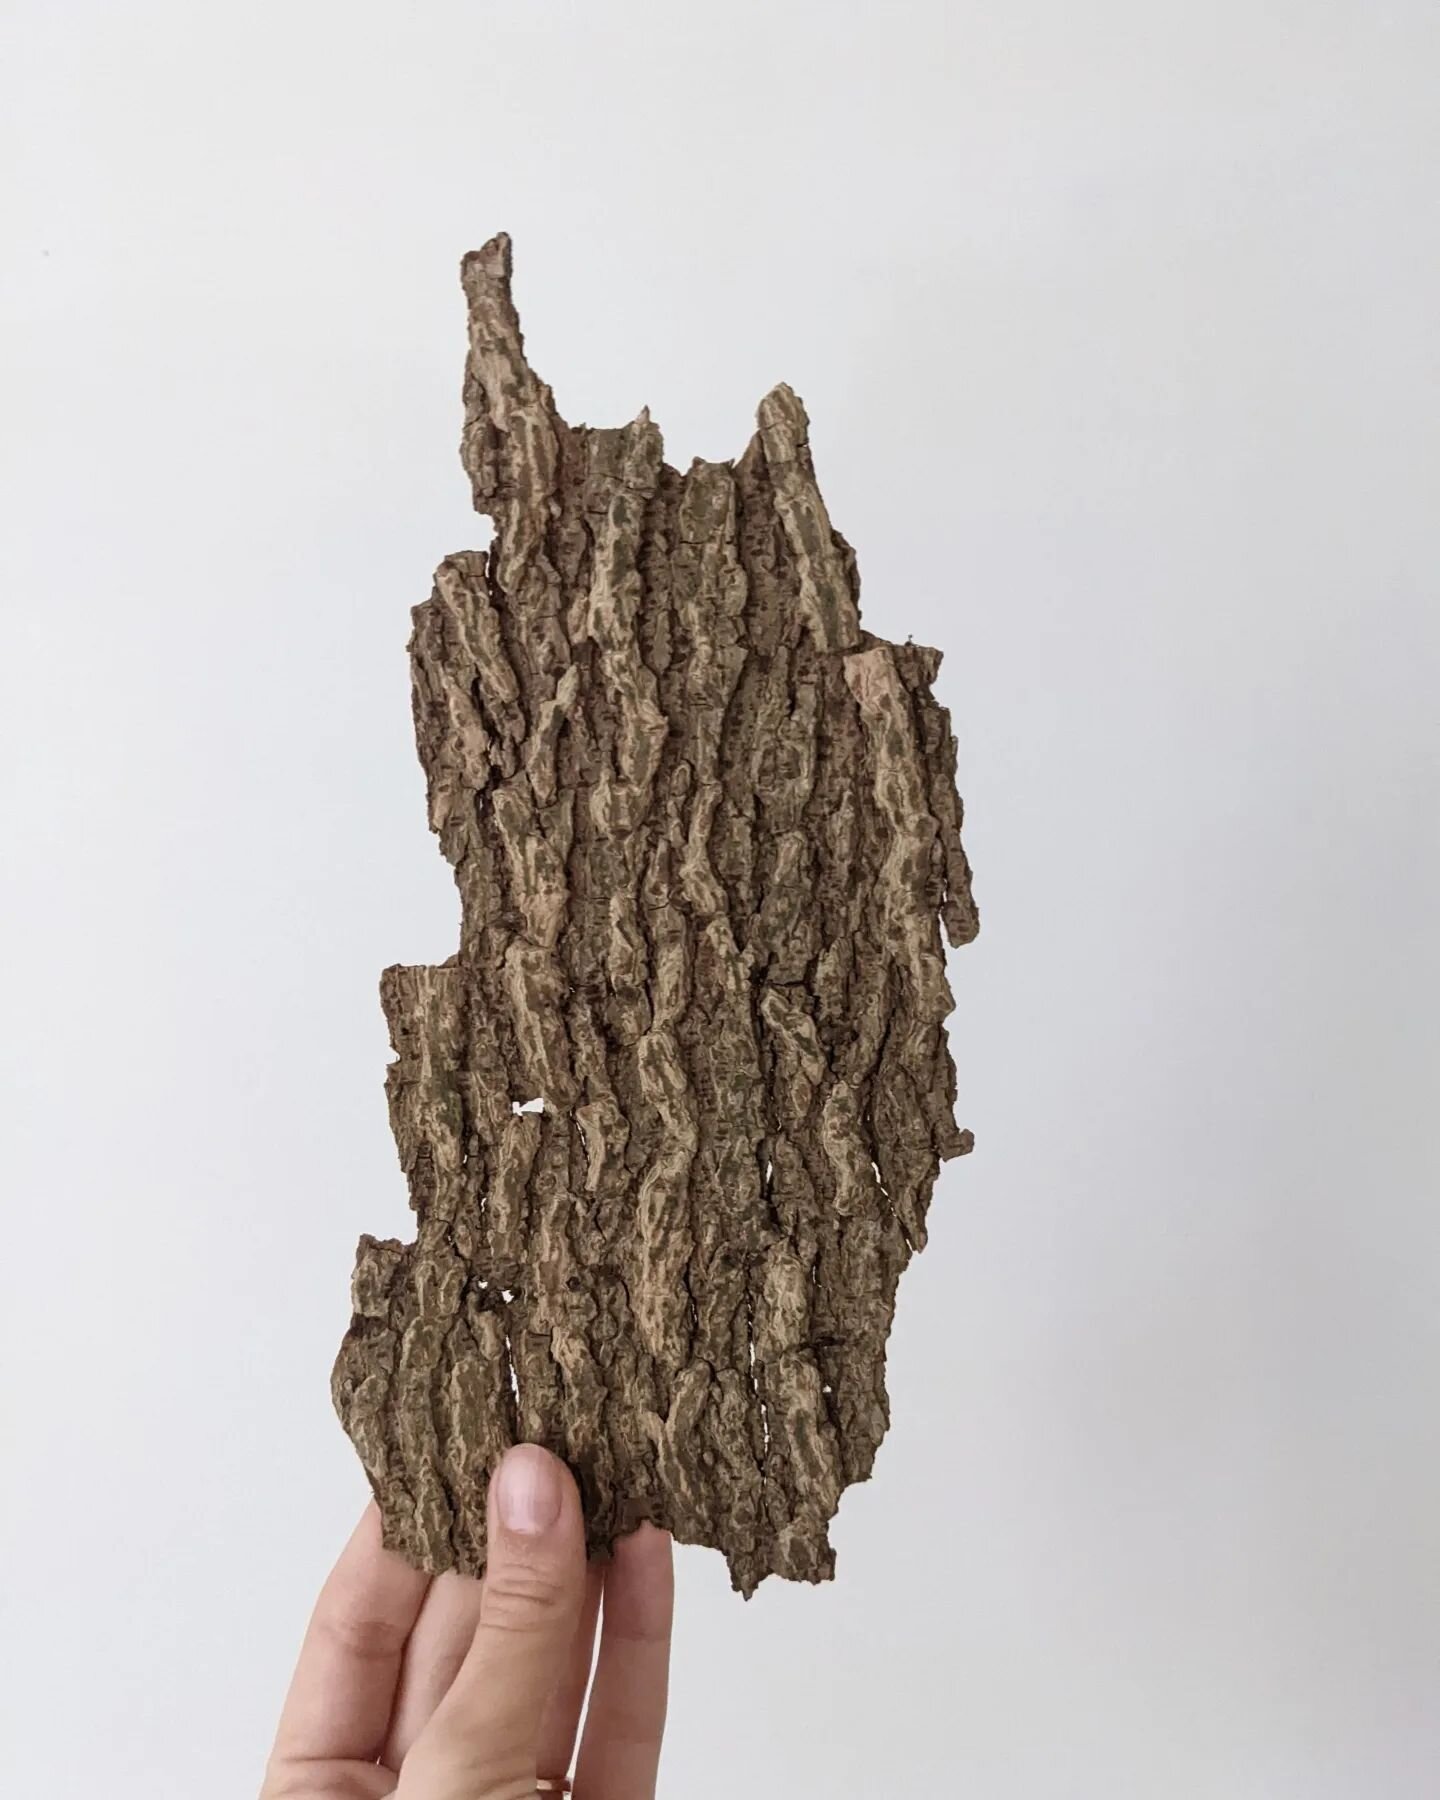 Bark Embossings are created by imprinting the texture of a tree bark onto paper. A way for us to look at trees from a different angle, really look closely and notice things we wouldn't otherwise. A Bark Embossing is like a tree's footprint: the mark 